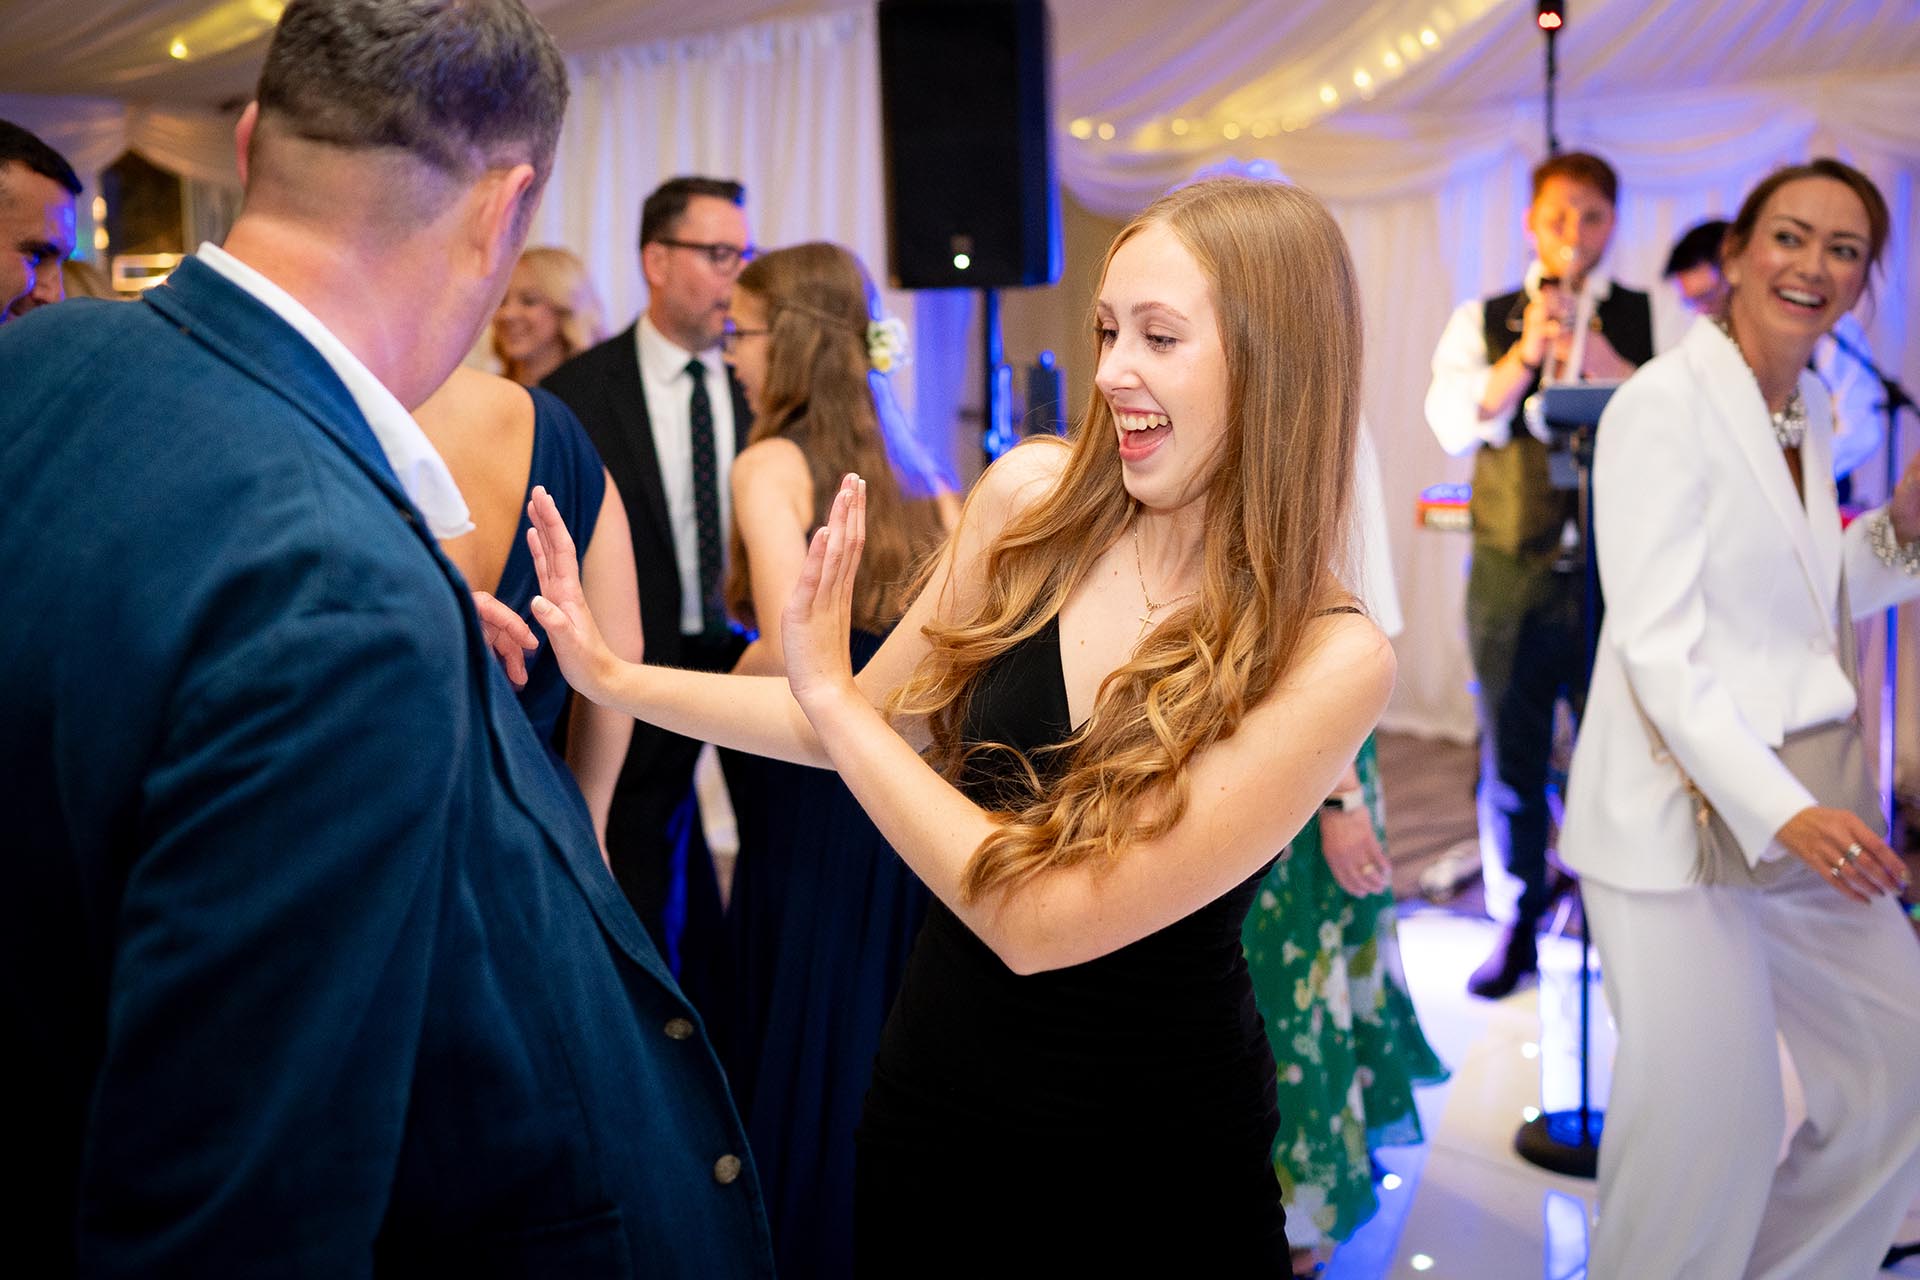 Wedding dancefloor photography by Essex wedding photographer at Mulberry House High Ongar